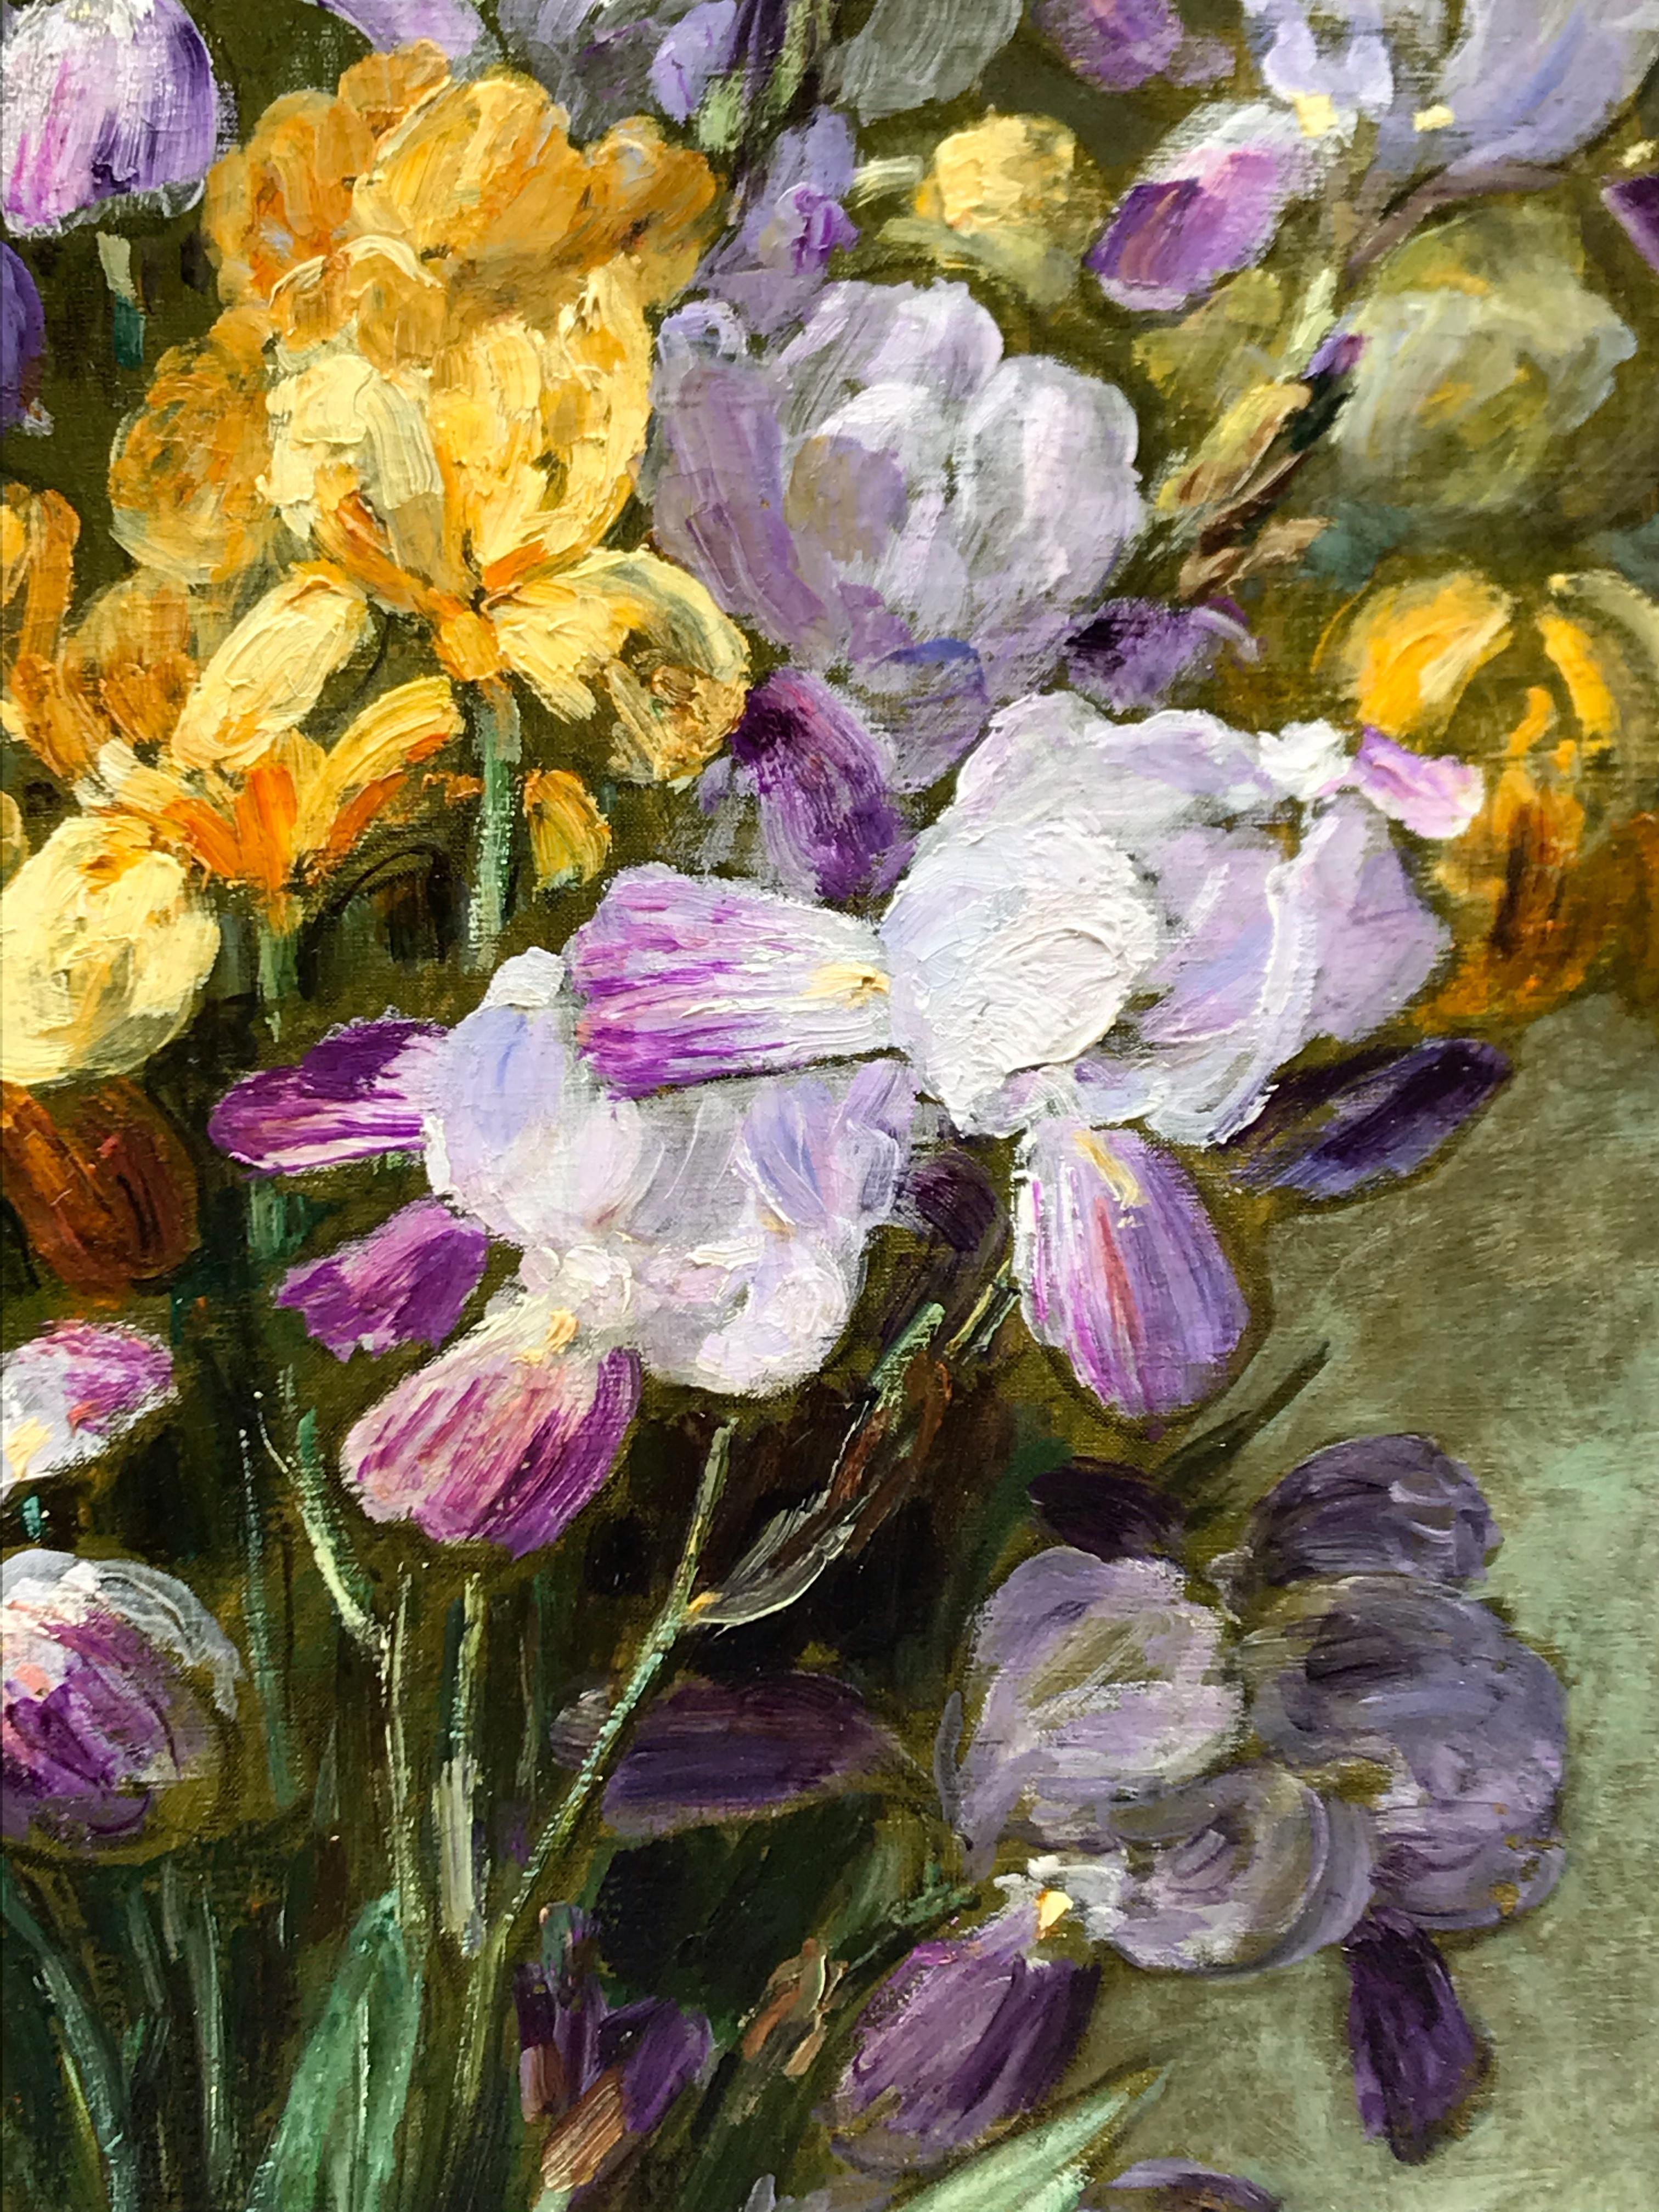 Joseph Alexis KREYDER (1839-1912)
Bunch of Iris
Oil on canvas signed low left
Old frame gilded with leaves
Dim canvas : 82 X 61 cm - Dim frame : 104 X 82 cm

Joseph Alexis KREYDER (1839-1912)
Born 21 October 1839 in Andlau, Bas-Rhin
Died on March